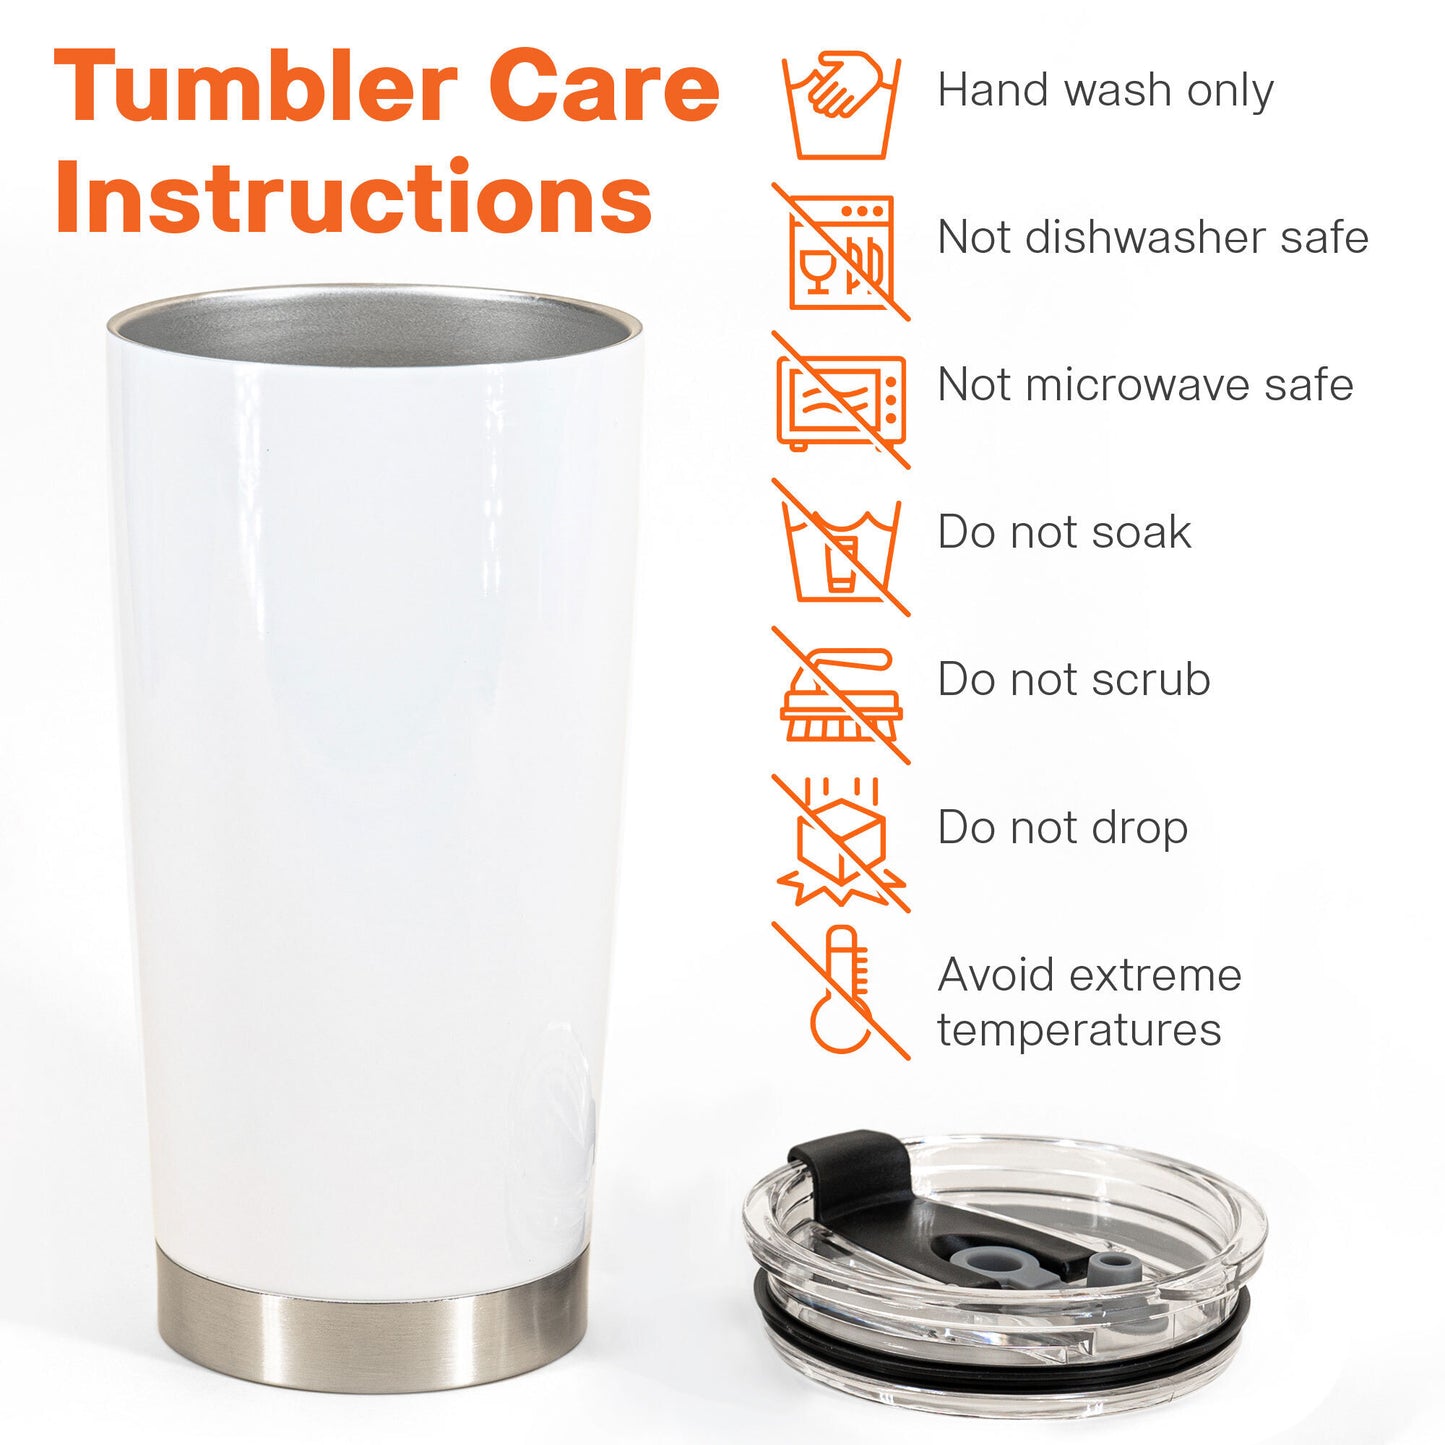 Thanks For Not Swallowing Us - Personalized Tumbler Cup